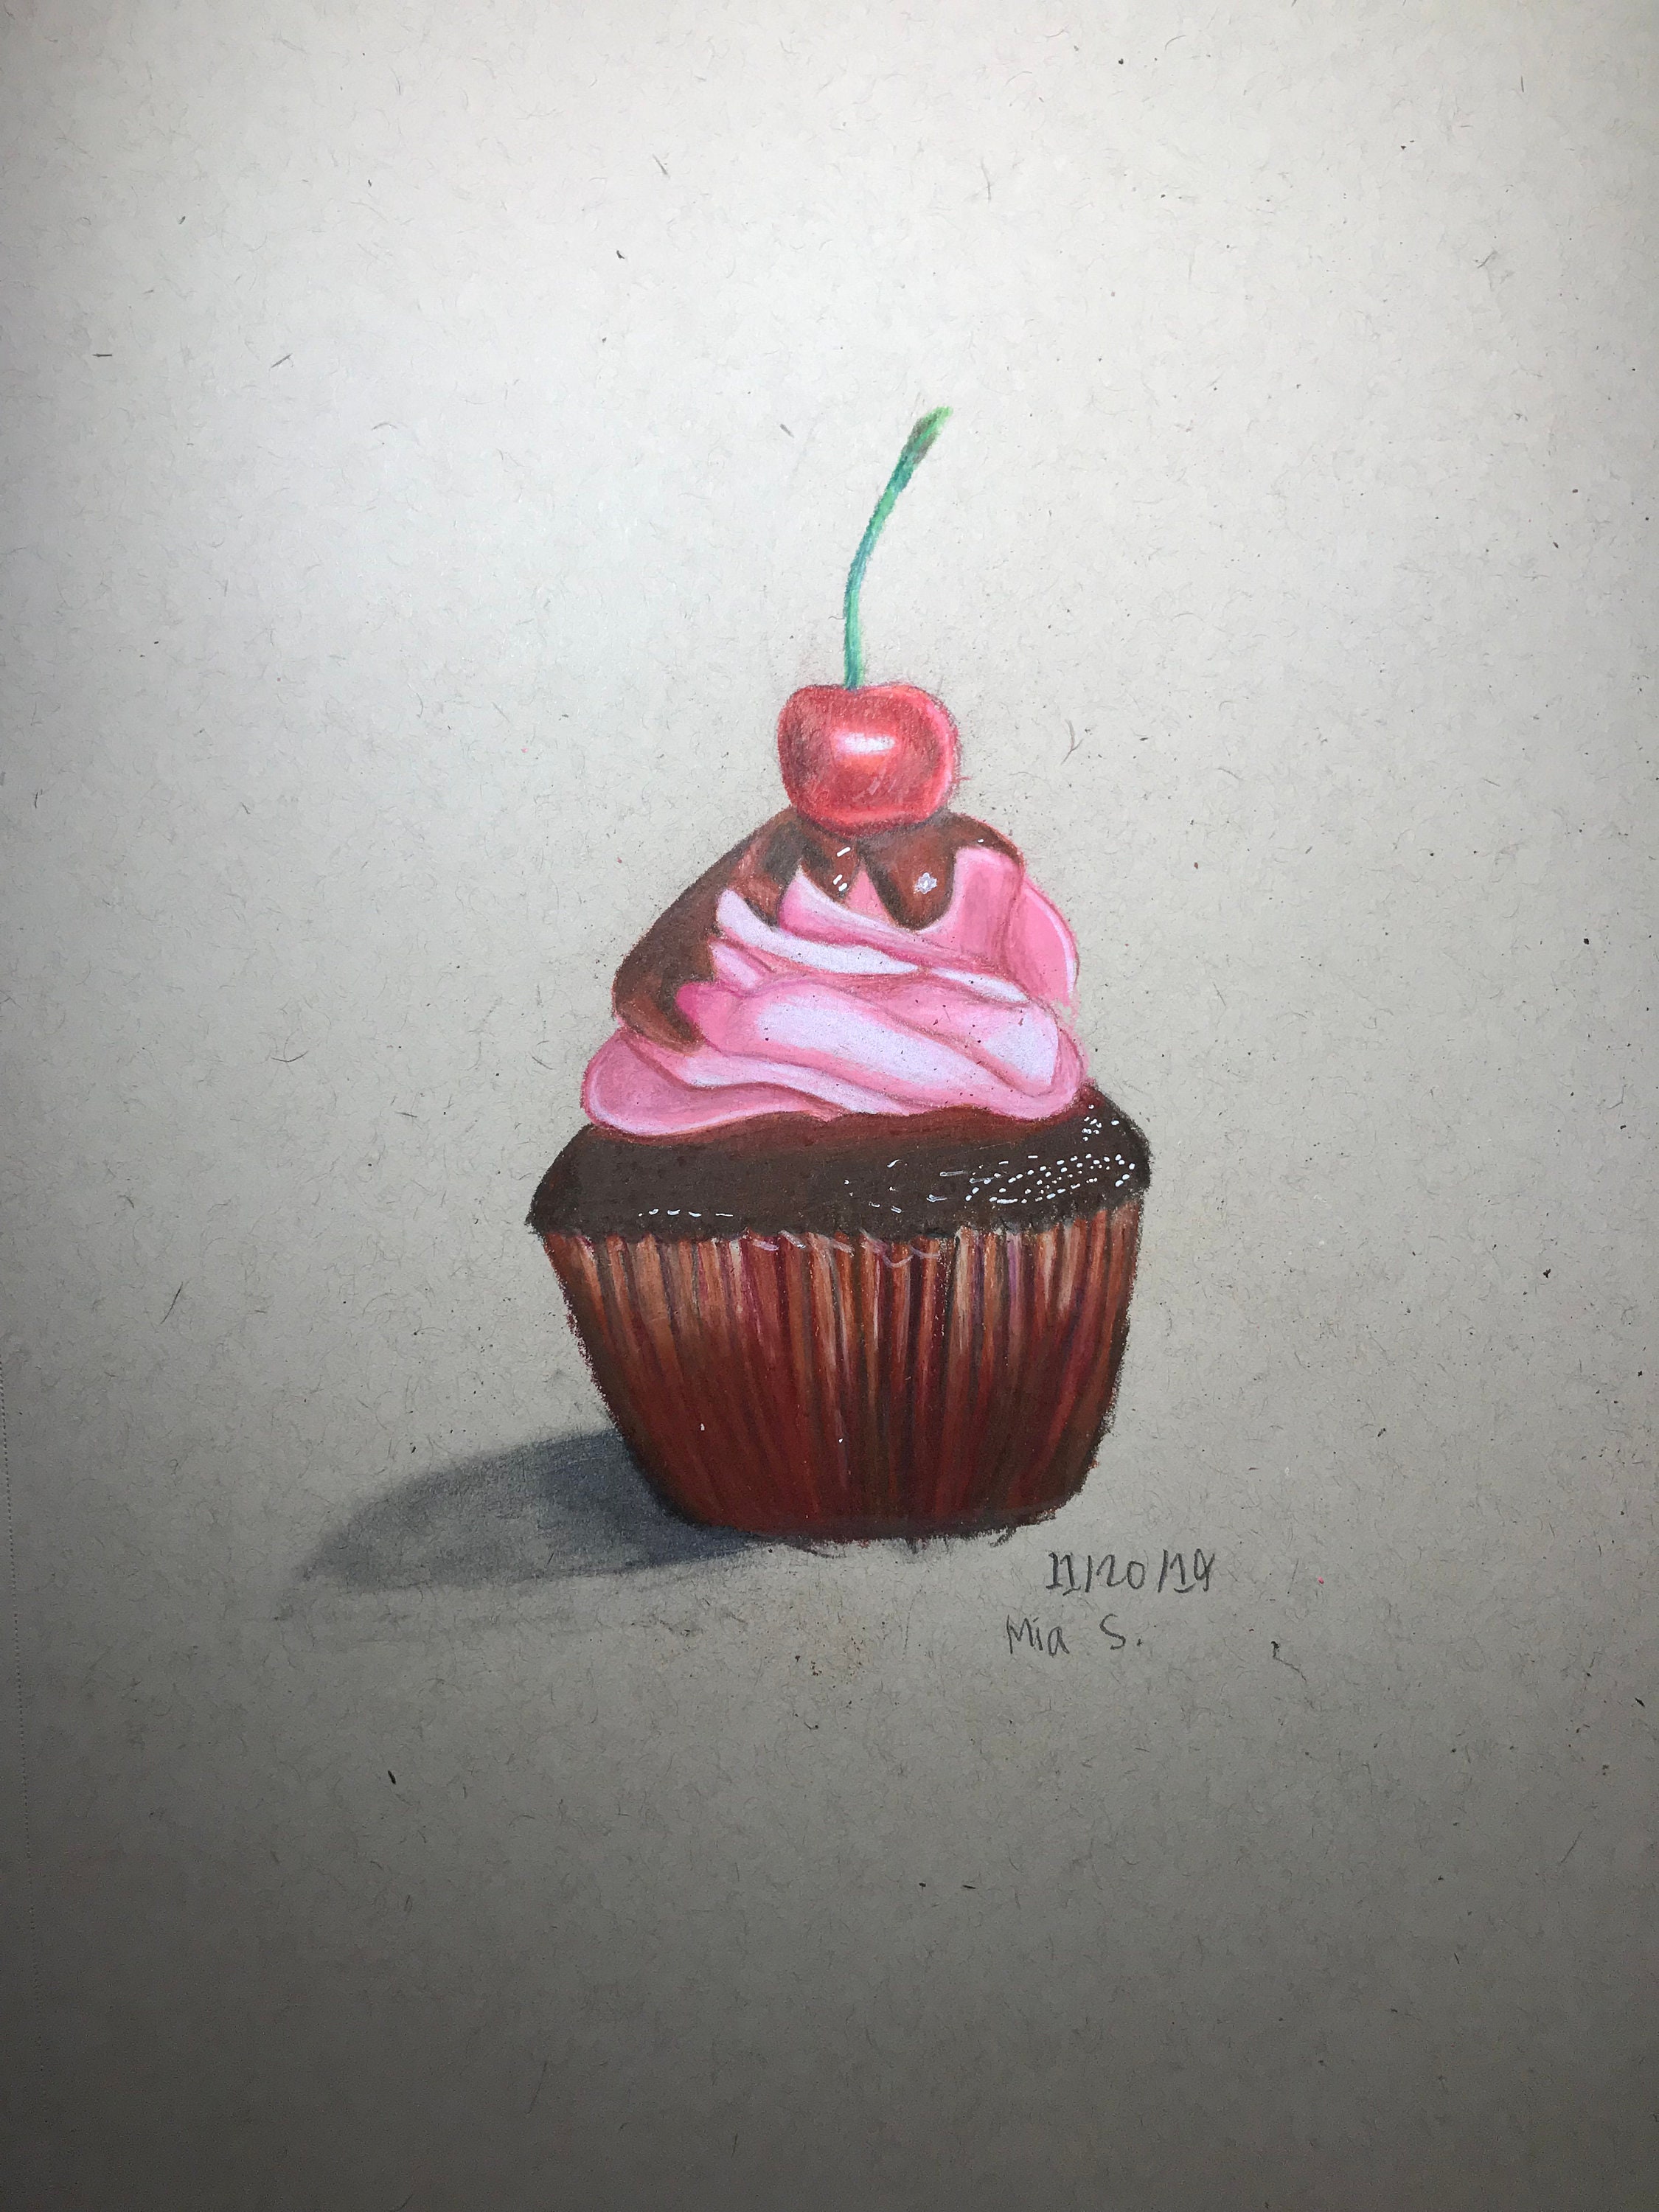 How to draw a cupcake  Step by step Drawing tutorials